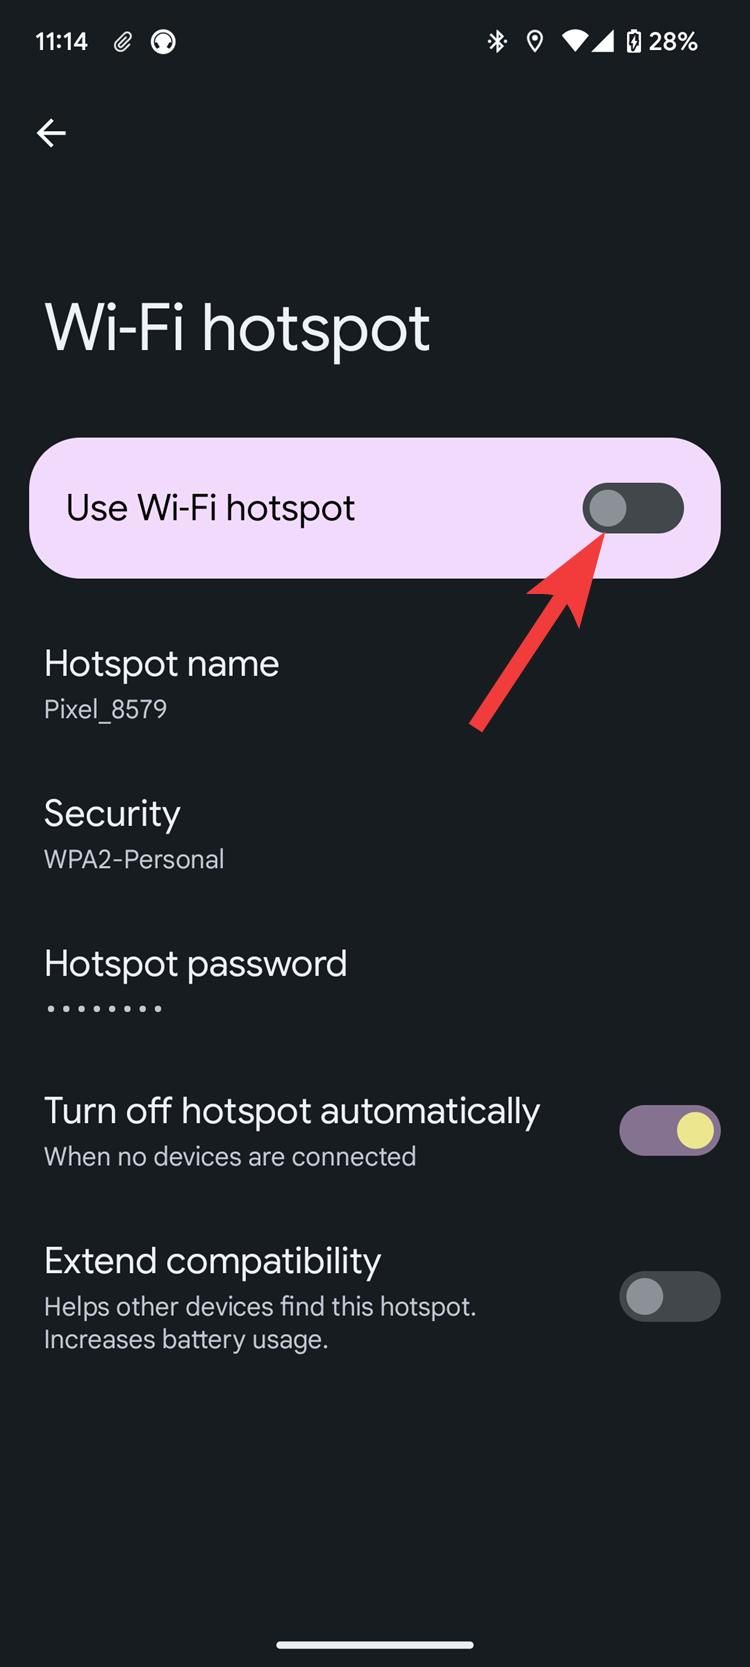 A screenshot of Android settings showing the Wi-Fi hotspot toggle.